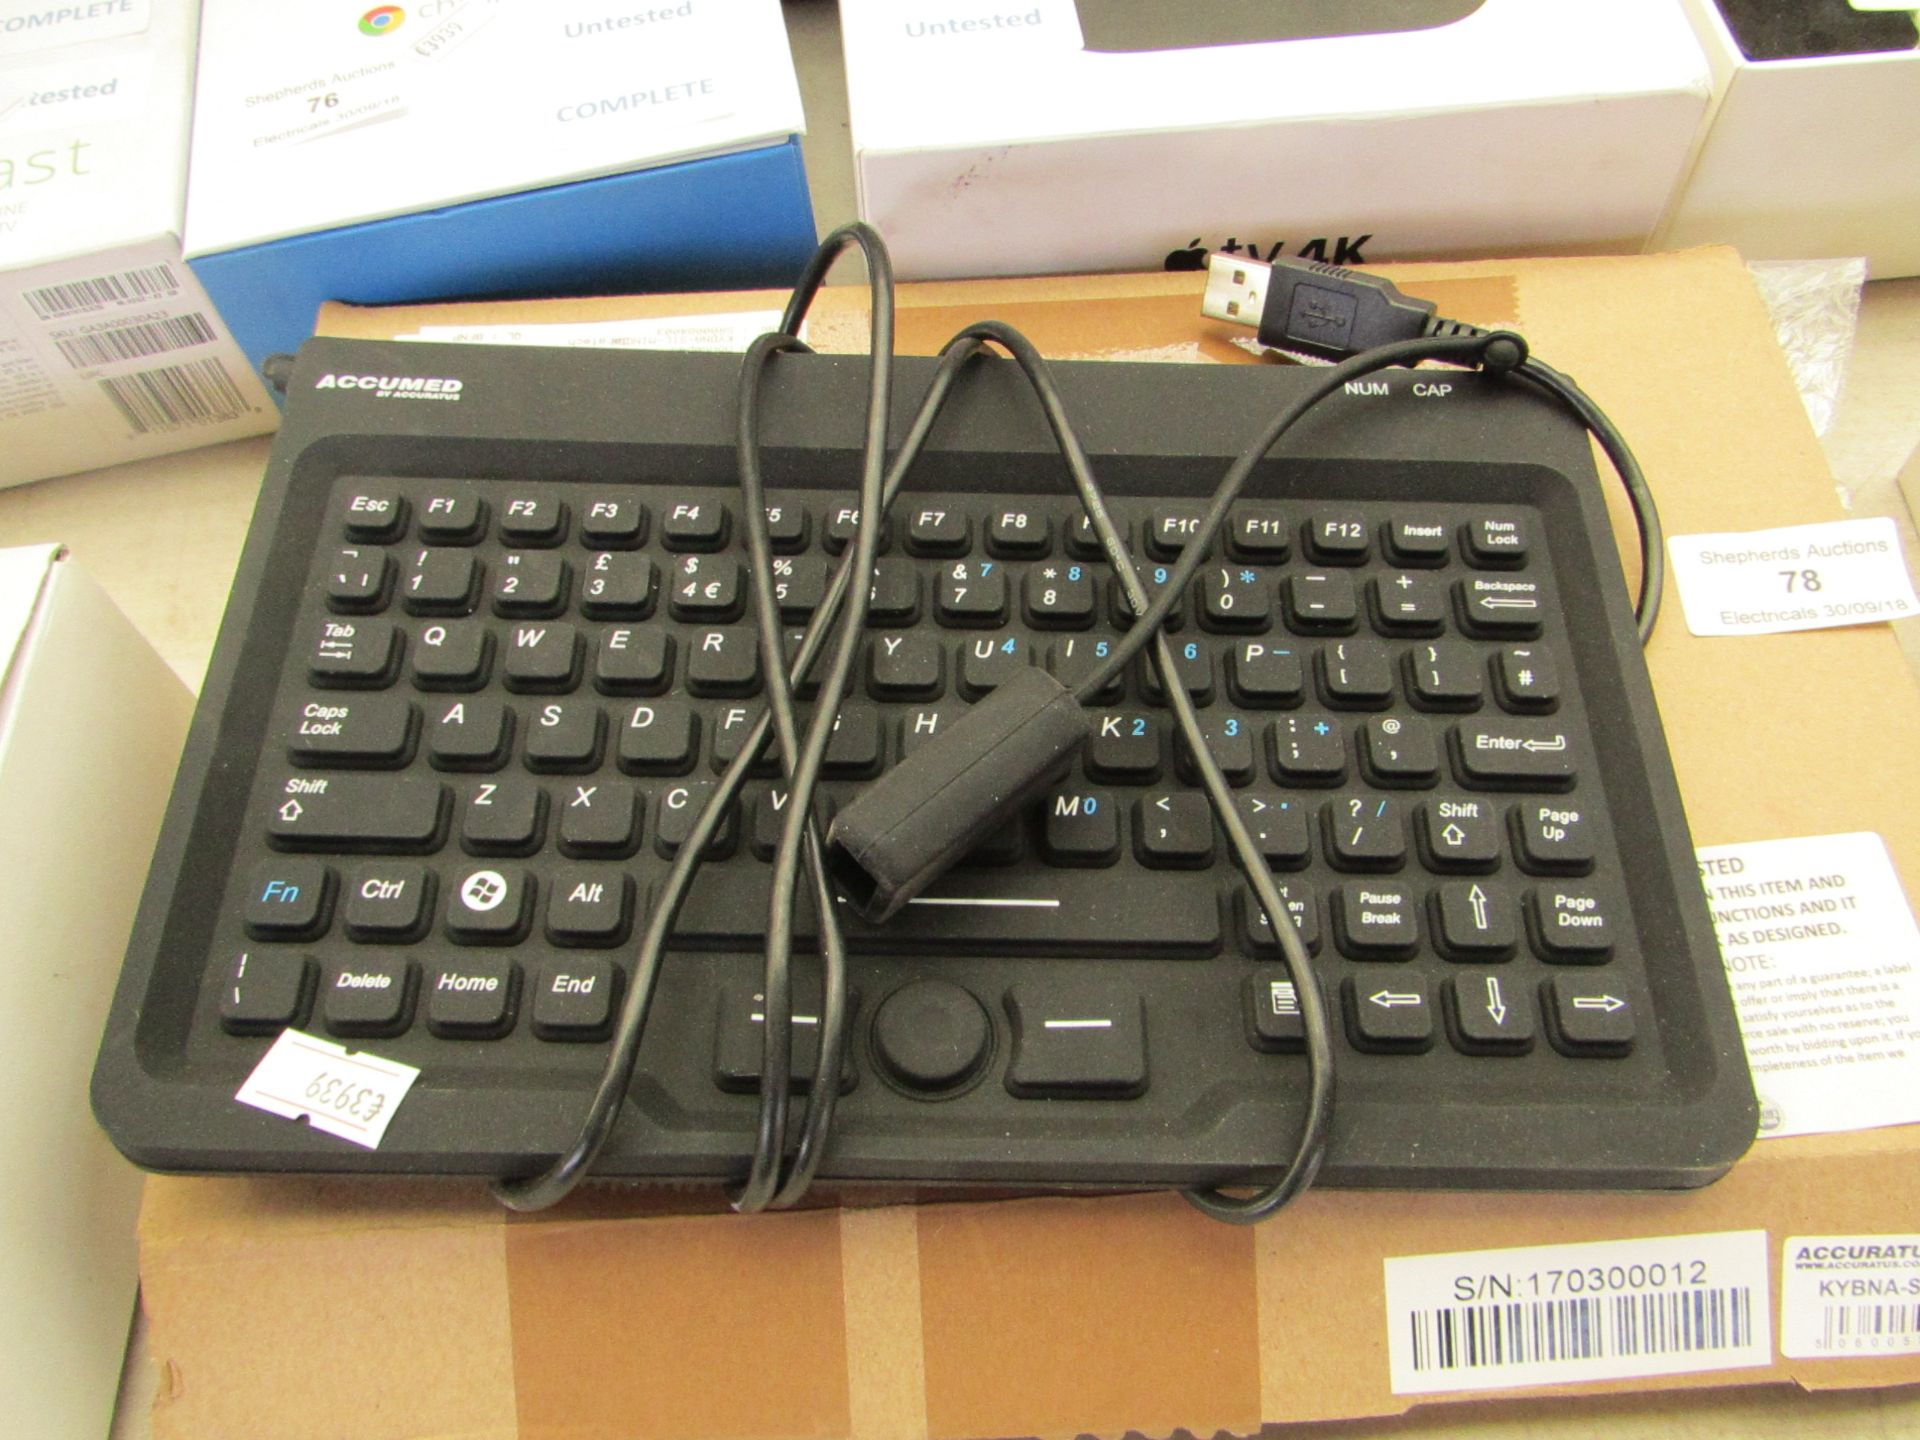 Accumed USB keyboard mousepad, tested working